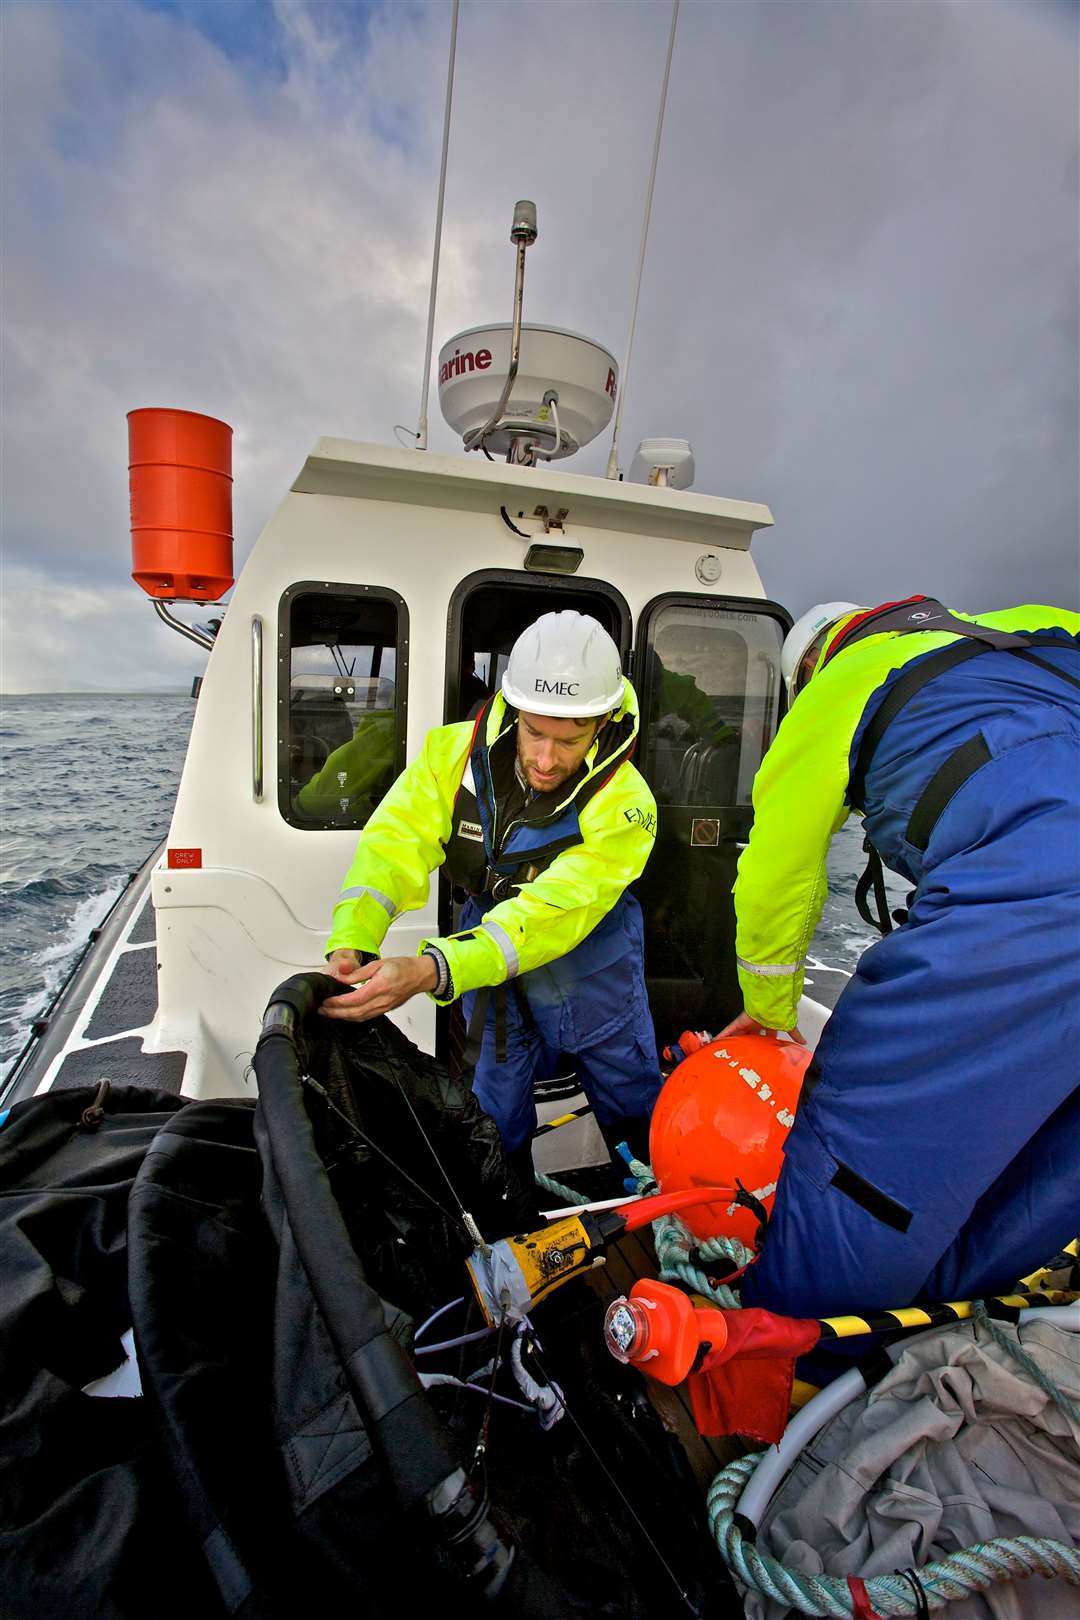 EMEC staff carrying out an acoustic survey.